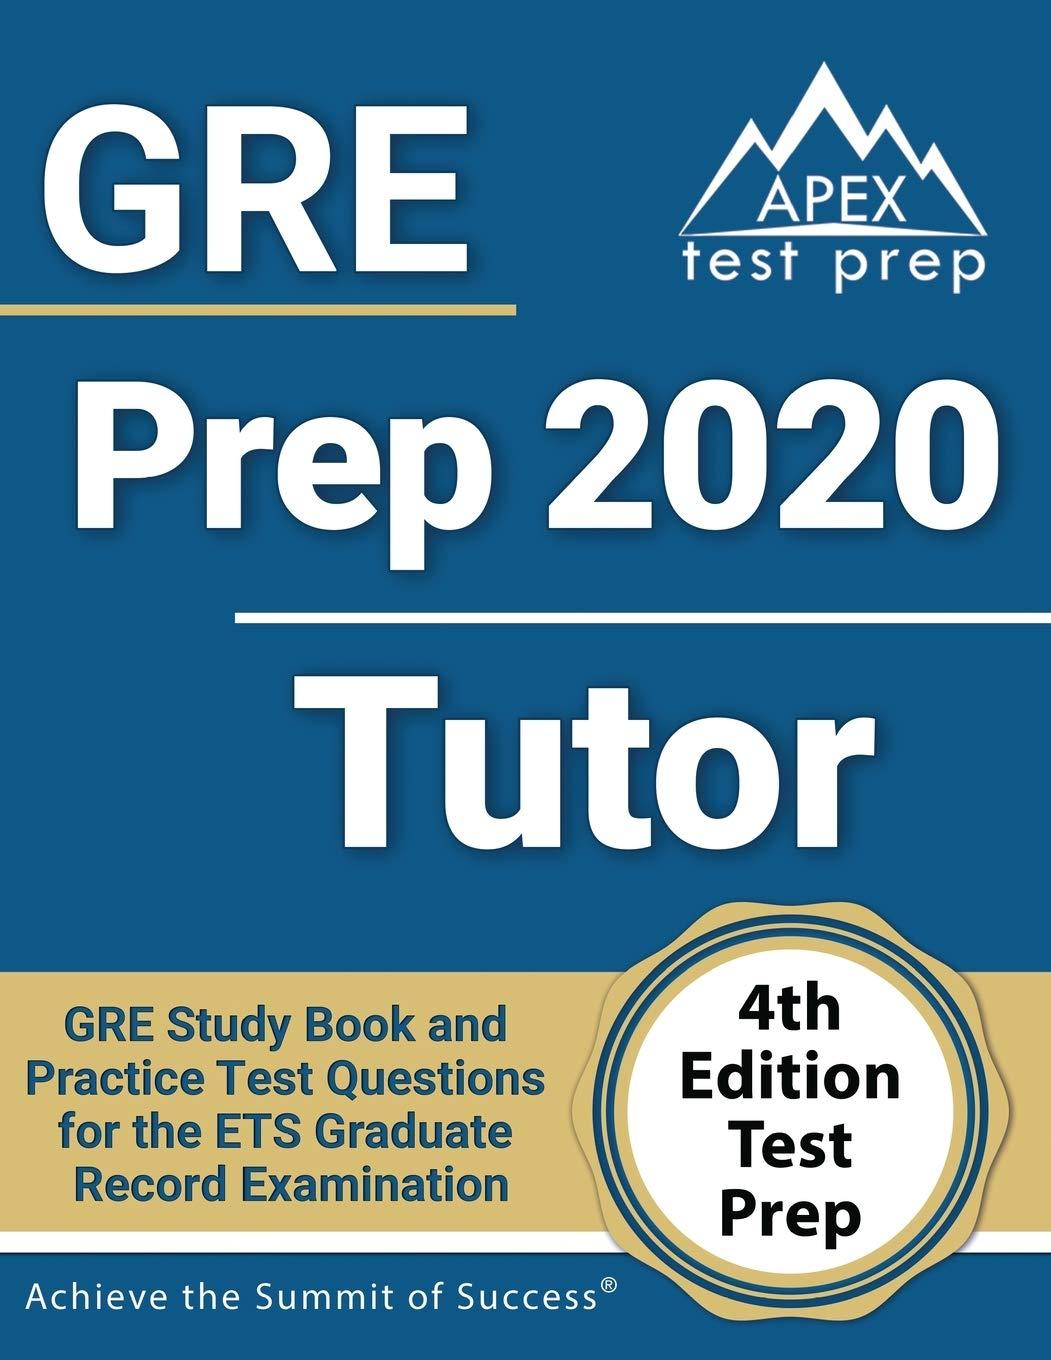 gre prep 2020 tutor gre study book and practice test questions for the ets graduate record examination 4th